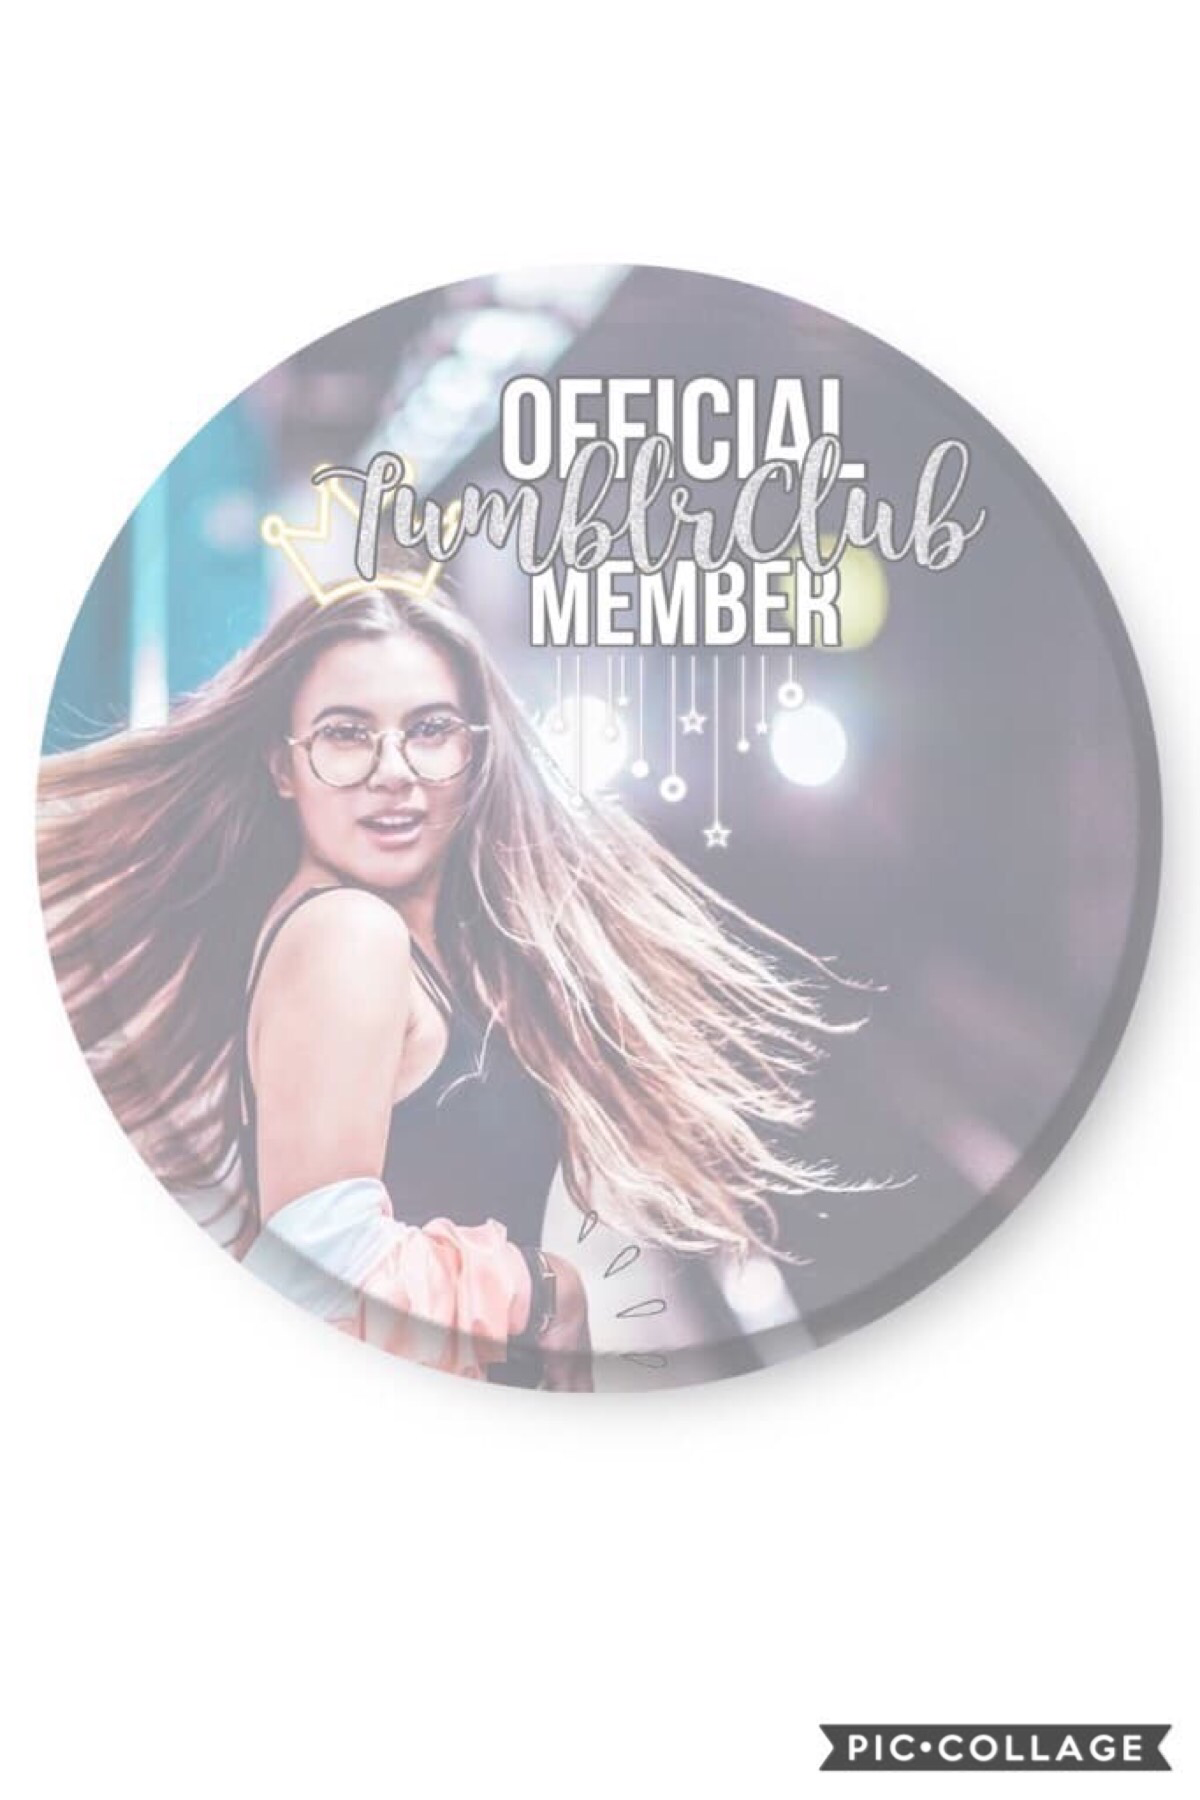 Tap
I forgot to post this yesterday, I am an official TumblrClub member! If you want to see more of my collages, or join the TumblrClub, go check it out😊
7/22/18